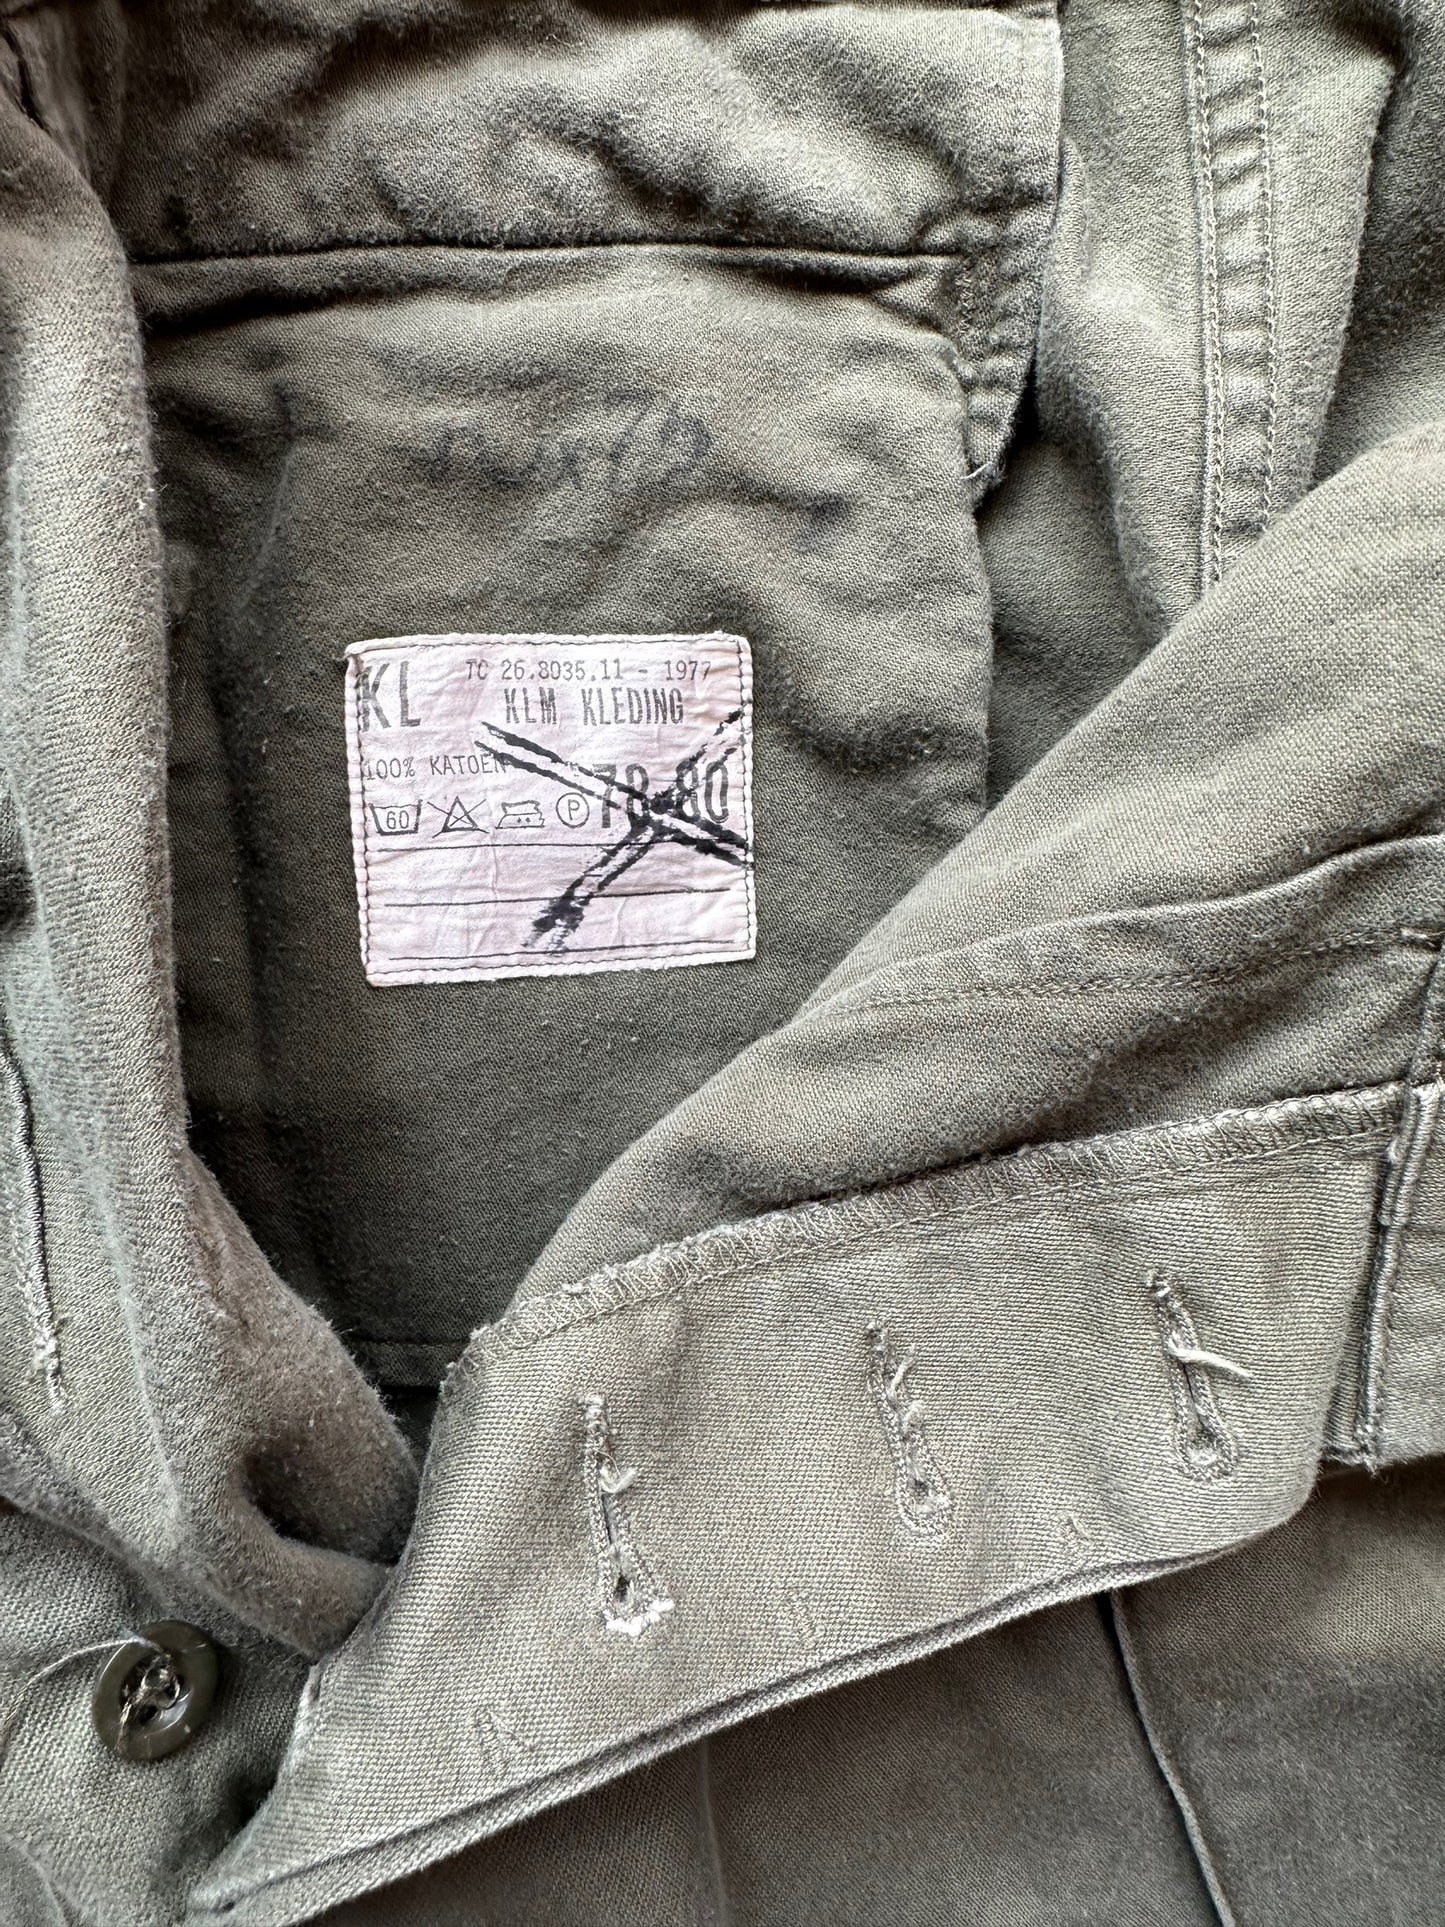 Tag View of Vintage European Workwear Cotton Trousers Olive Drab W28 | Barn Owl Vintage Seattle | Vintage Workwear Trousers Seattle